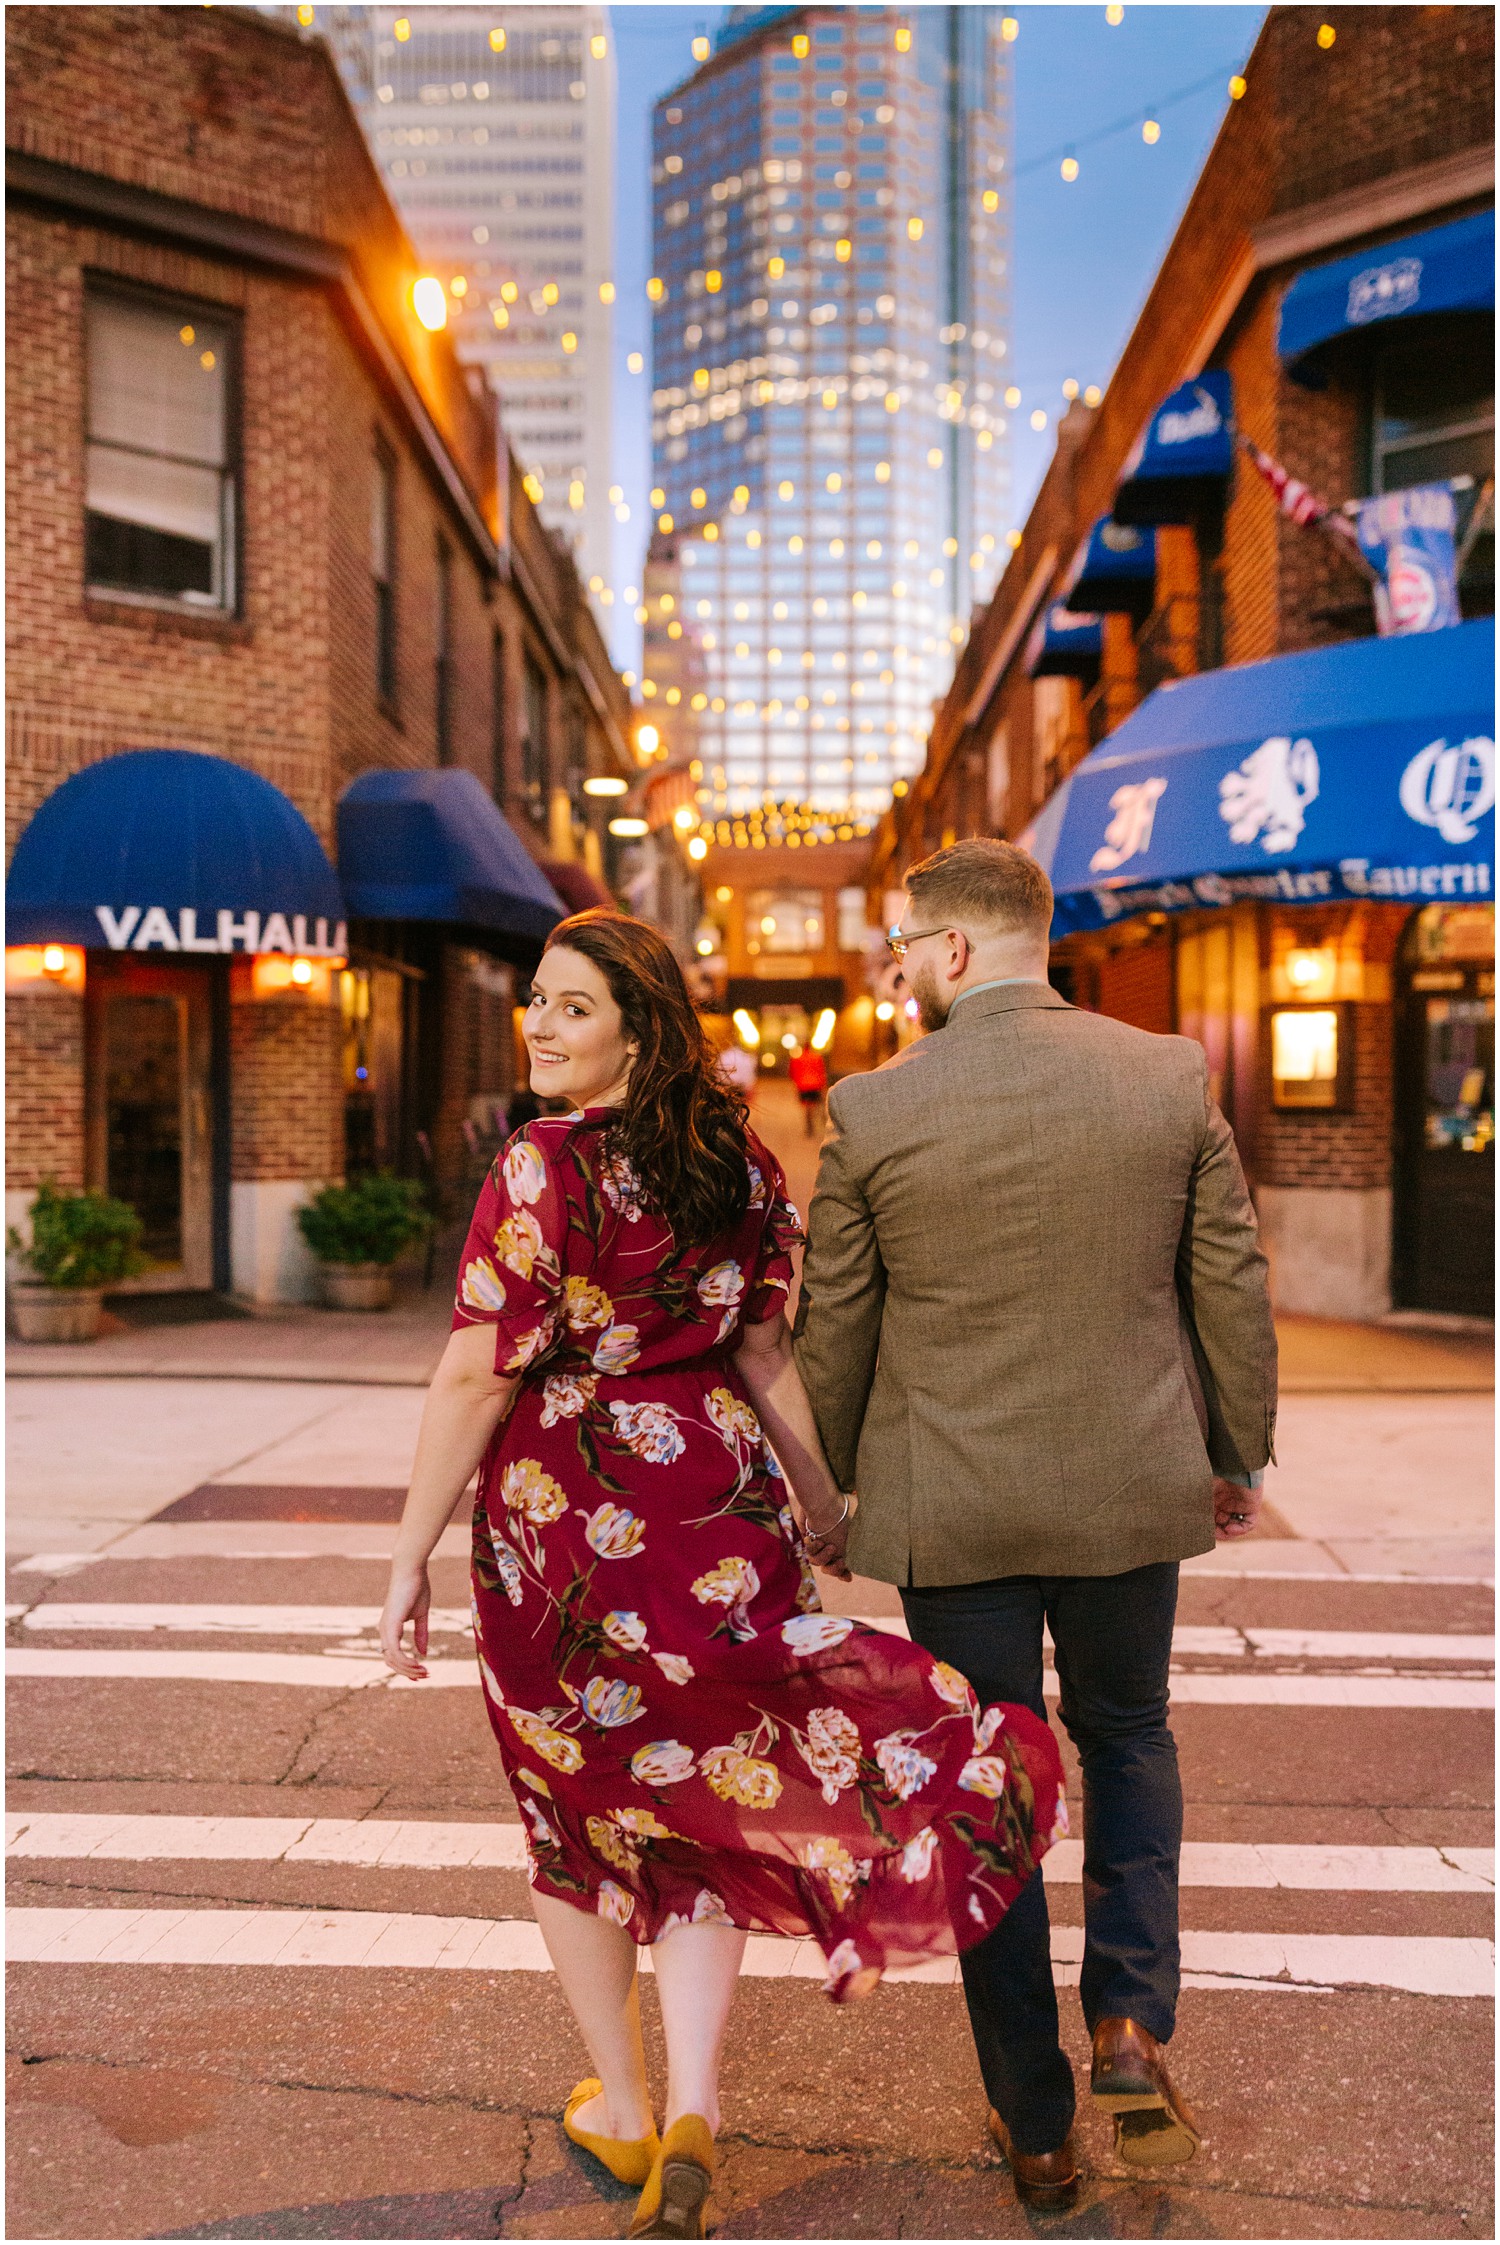 uptown Charlotte engagement session at night 